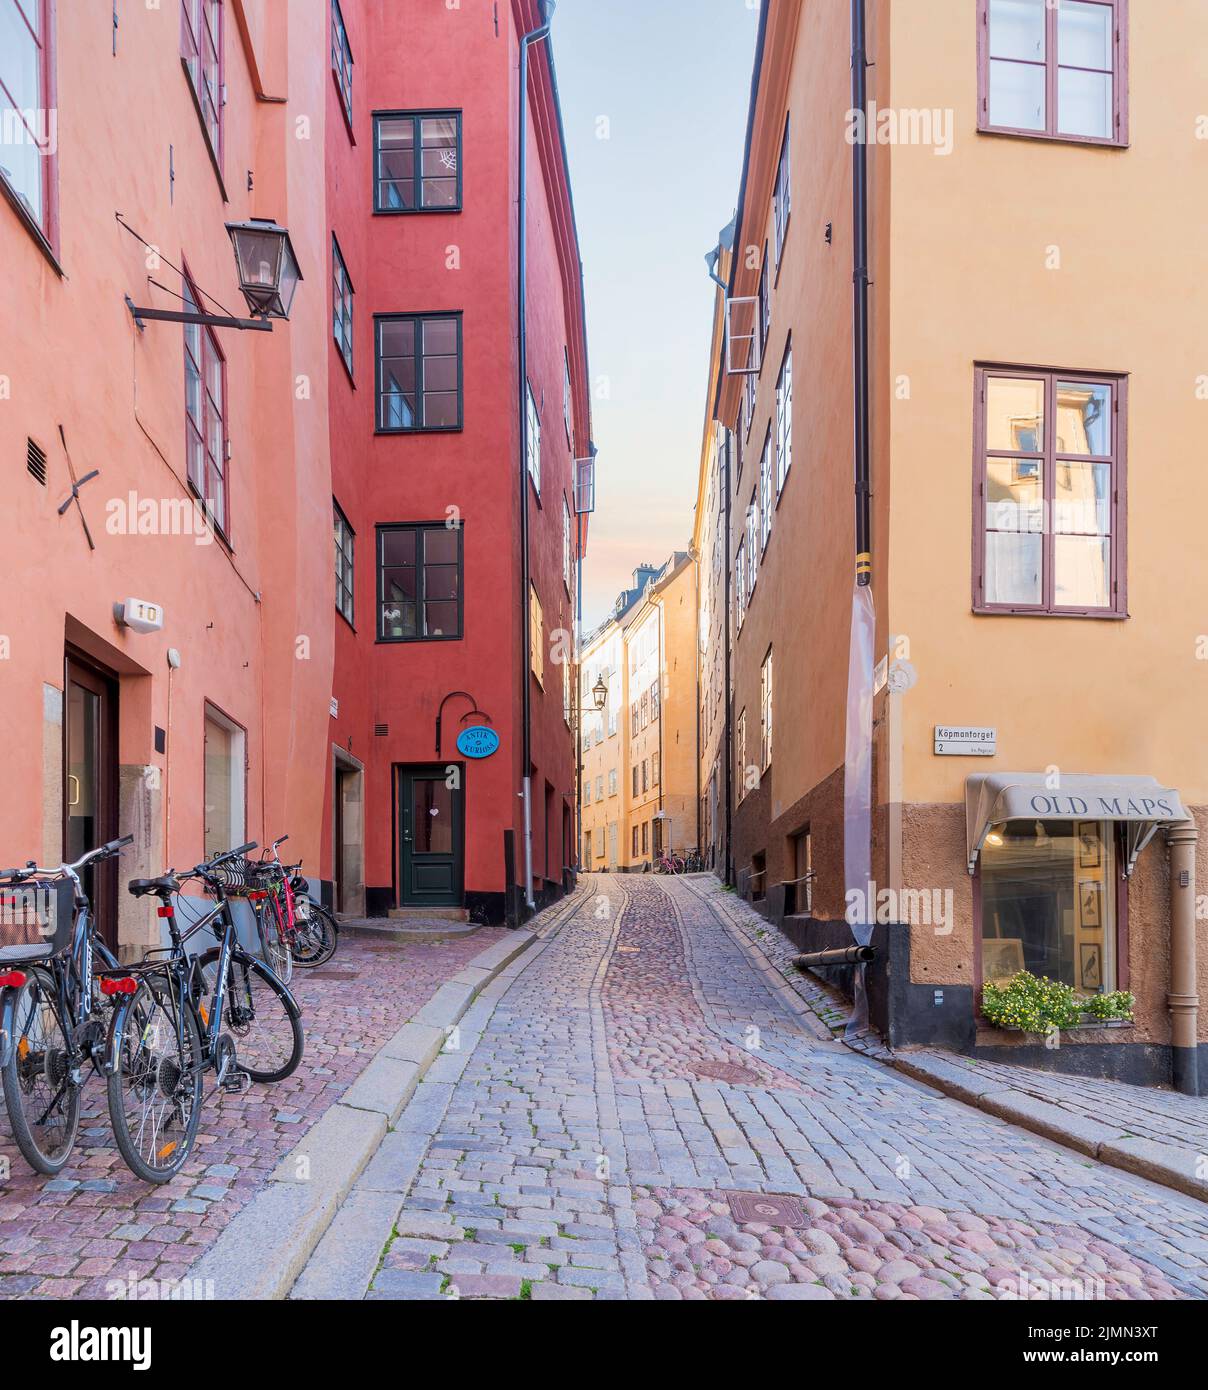 Narrow alley located in Gamla stan, the old town of Stockholm, Sweden with old style colorful houses, parked bicycles, and cobblestone street, Stockholm, Sweden Stock Photo